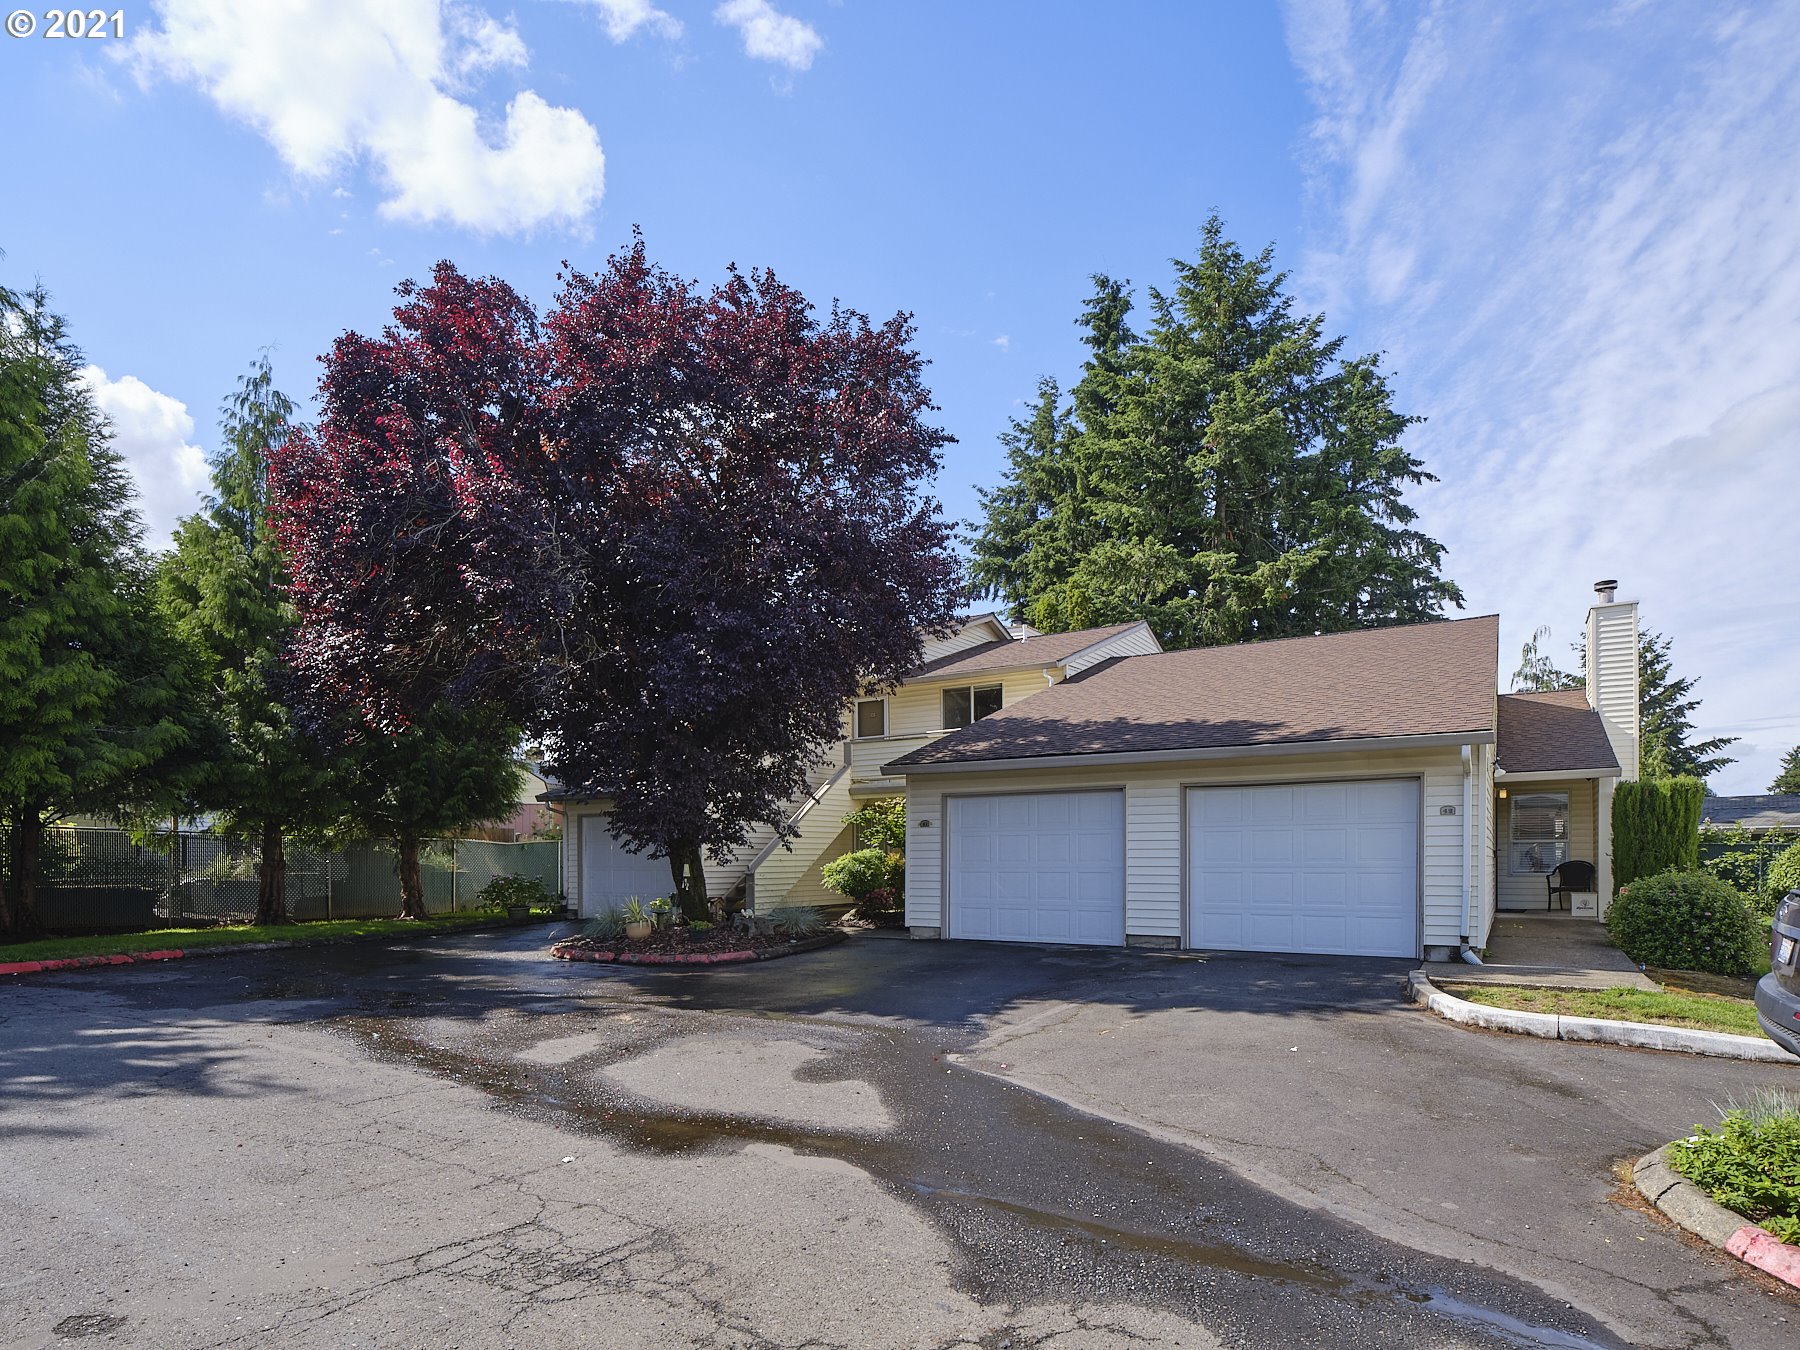 508 SE 157TH AVE 41 (1 of 19)